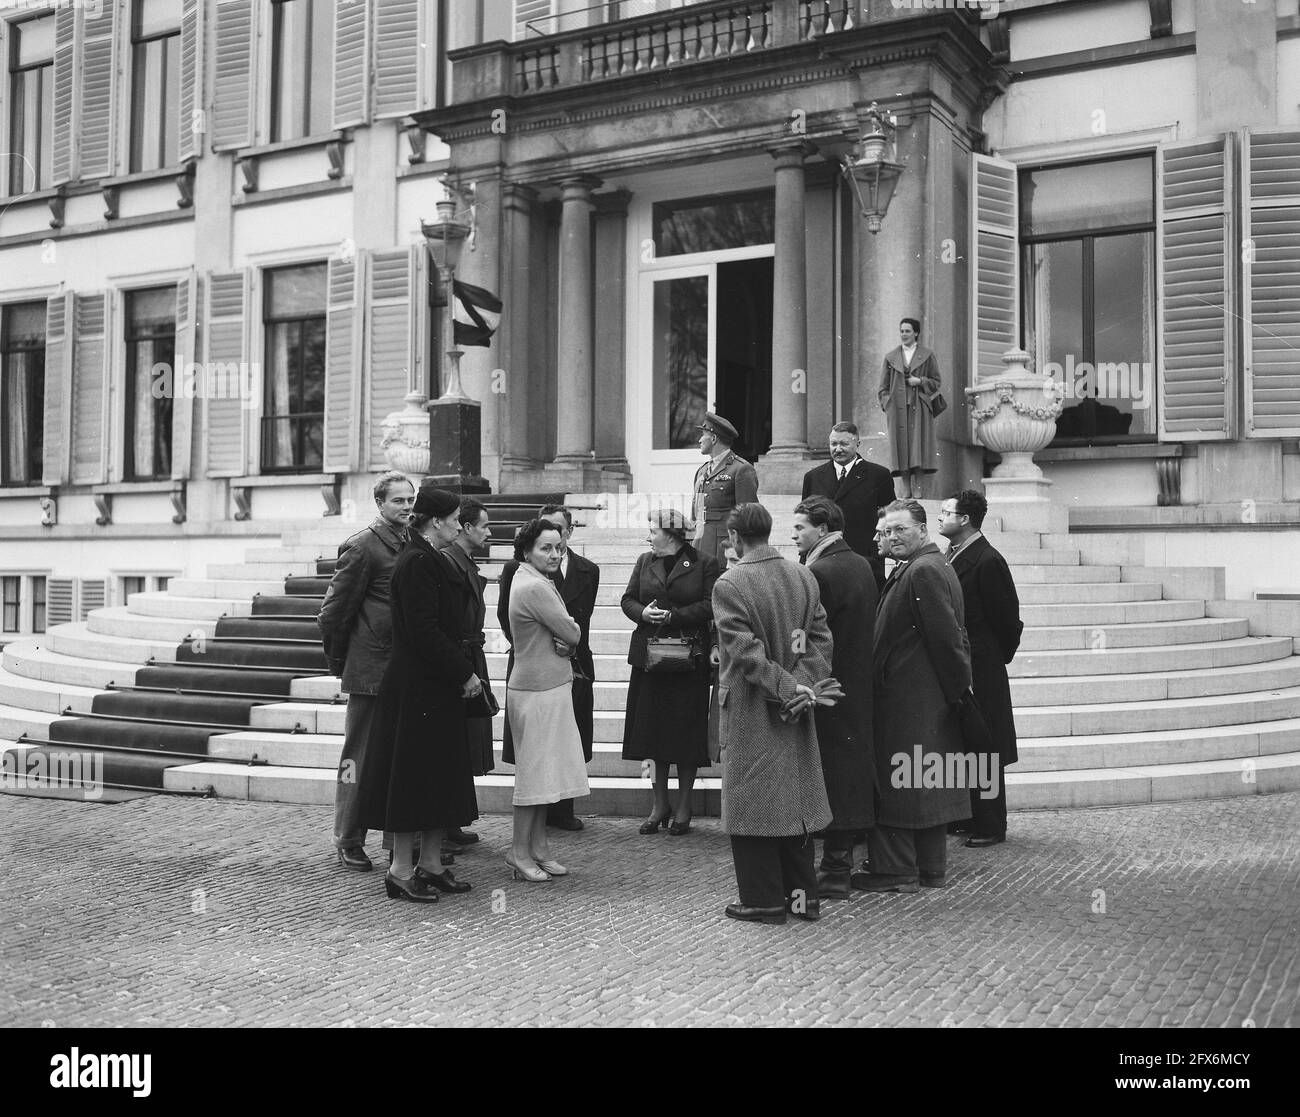 Hungarian refugees at the Queen's house at Soestdijk, November 27, 1956, KONINGIN, FLIGHTS, The Netherlands, 20th century press agency photo, news to remember, documentary, historic photography 1945-1990, visual stories, human history of the Twentieth Century, capturing moments in time Stock Photo